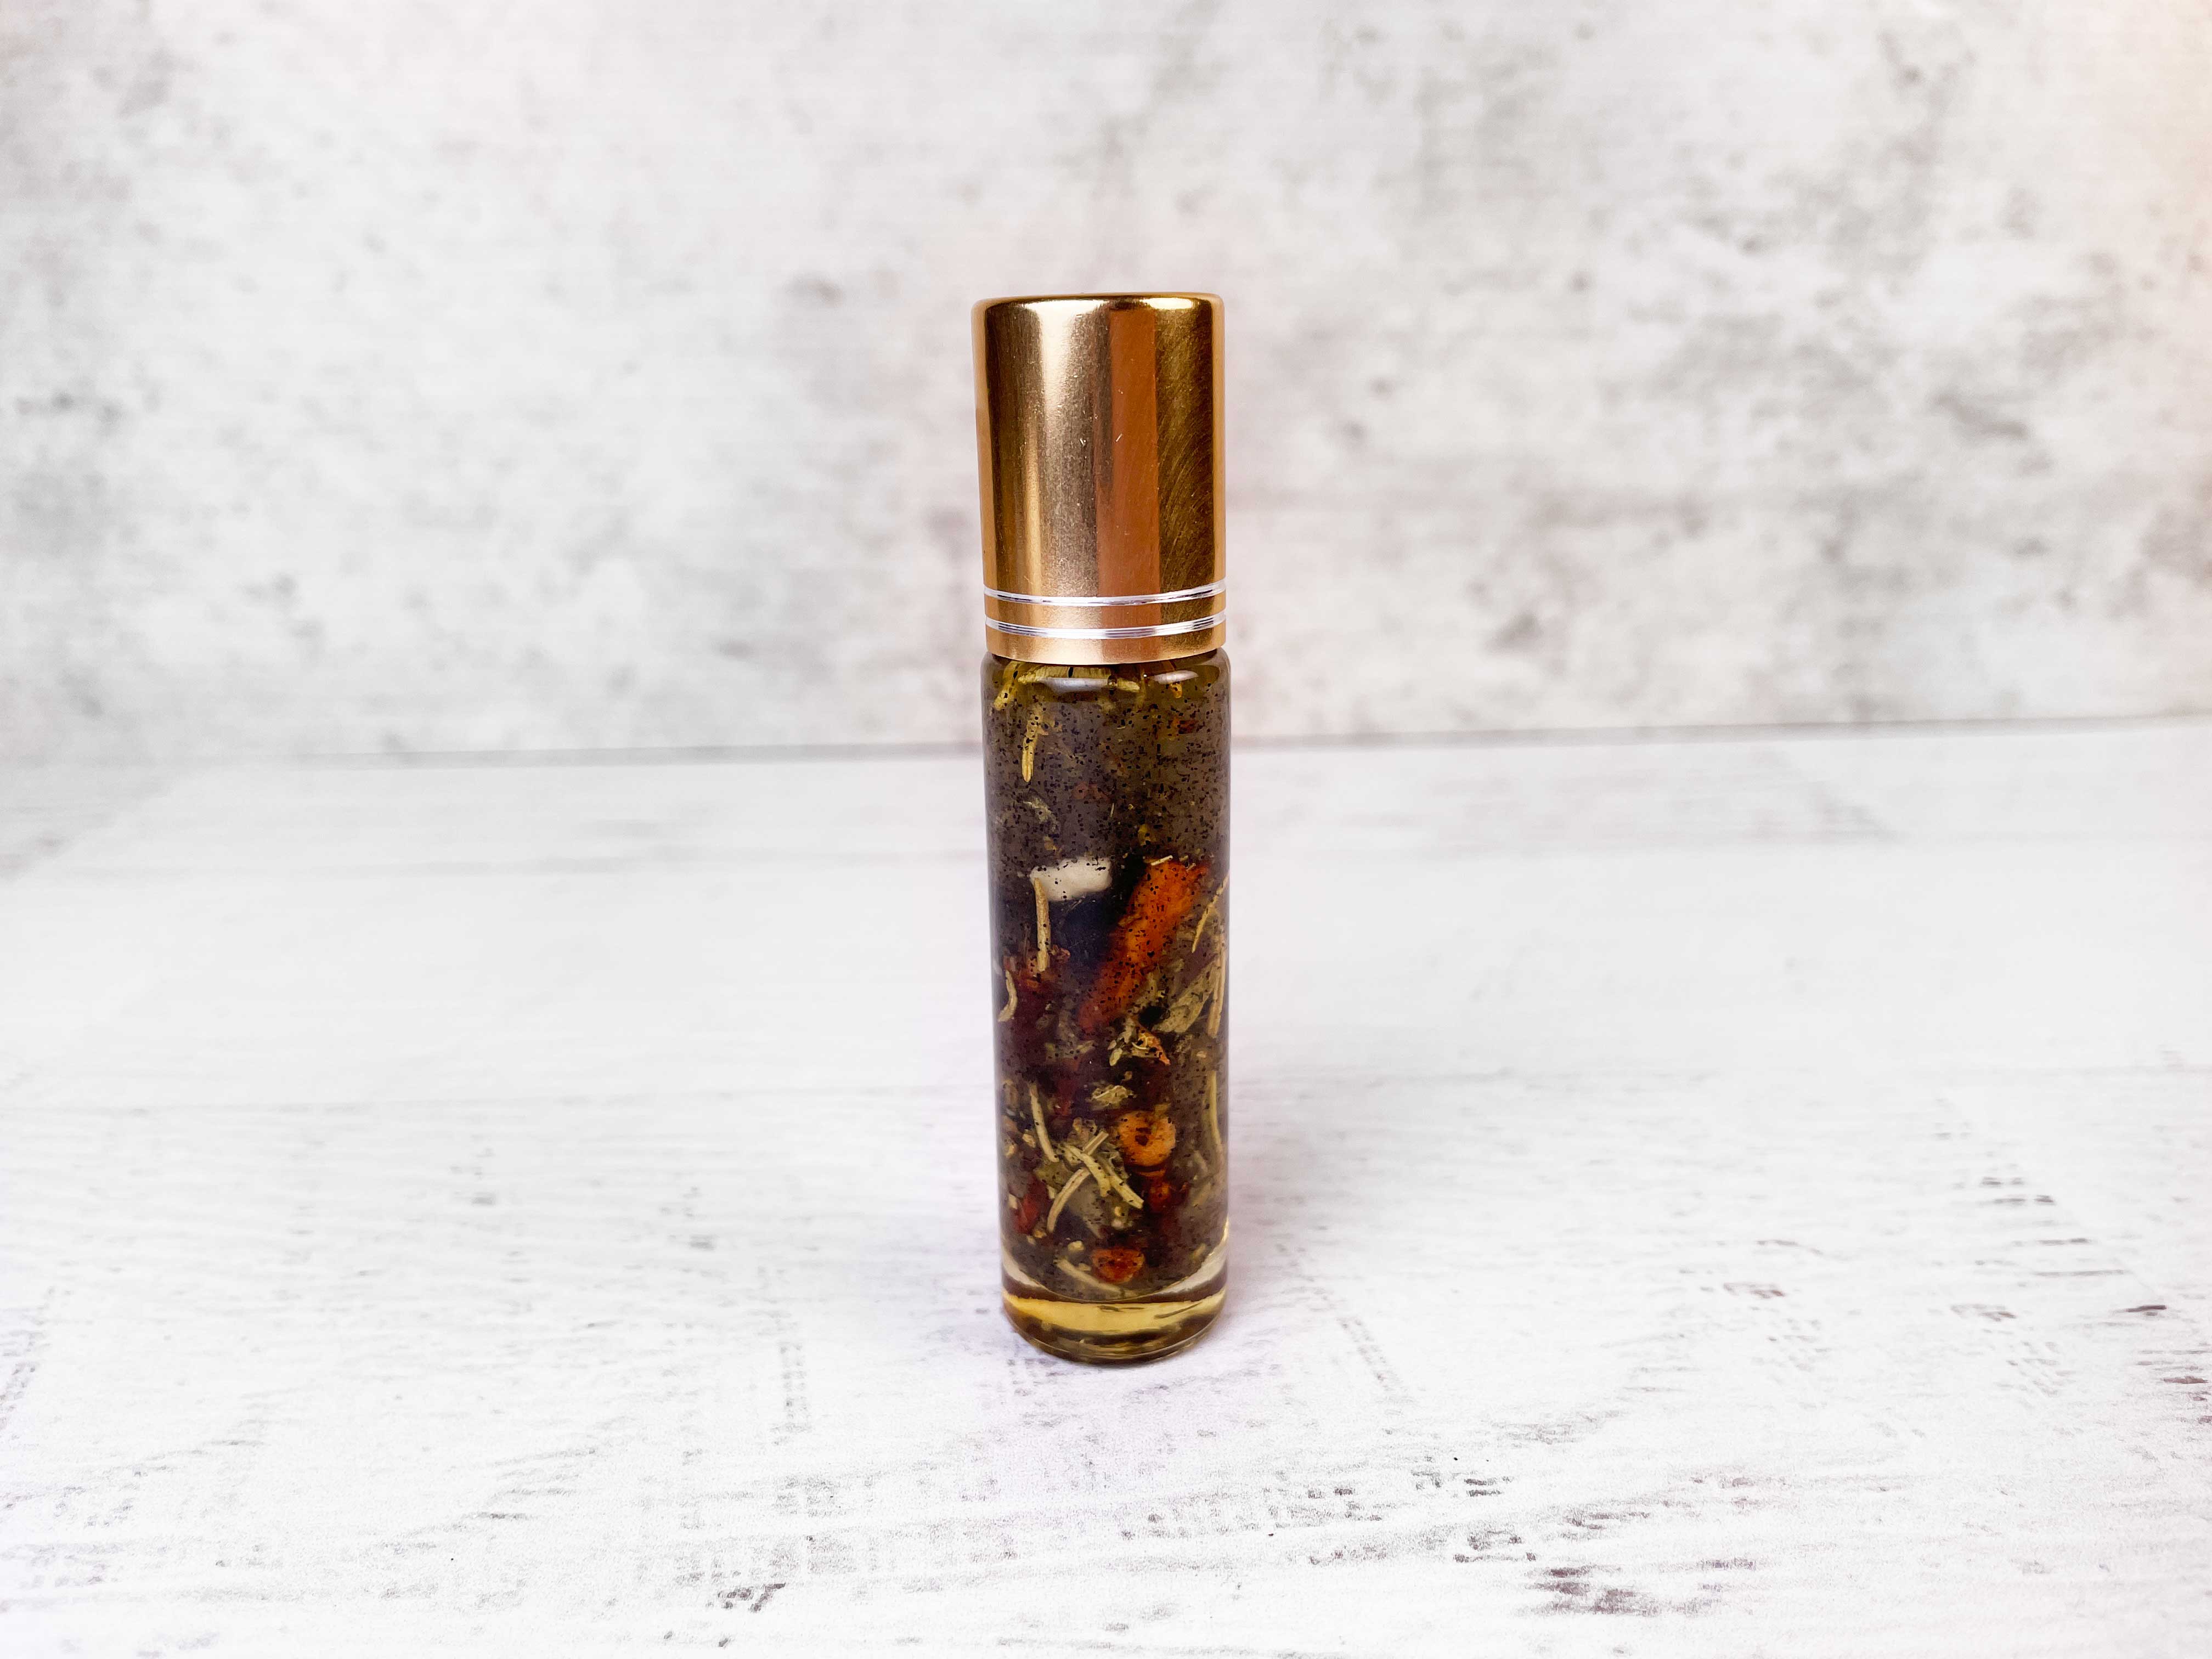 Buy Online Latest and Unique Grounding, Protection, Purifying Oil | Shop Best Spiritual Items - The Mystical Ritual